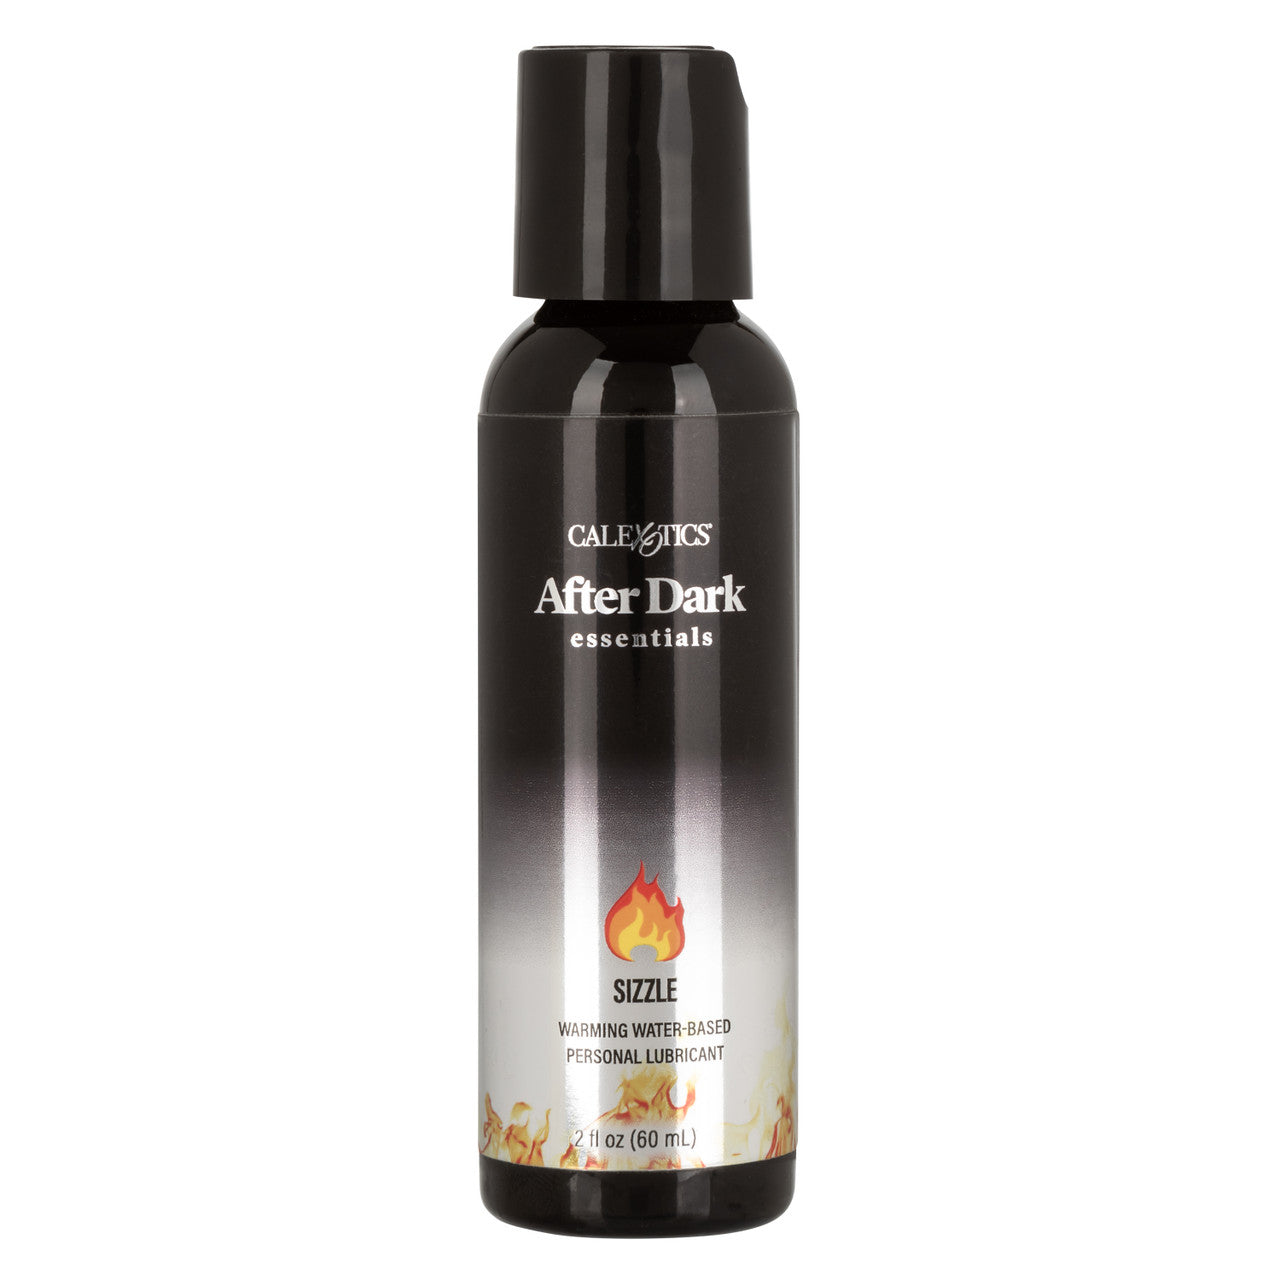 After Dark Essentials Sizzle Ultra Warming  Water-Based Personal Lubricant - 2 Oz.-0